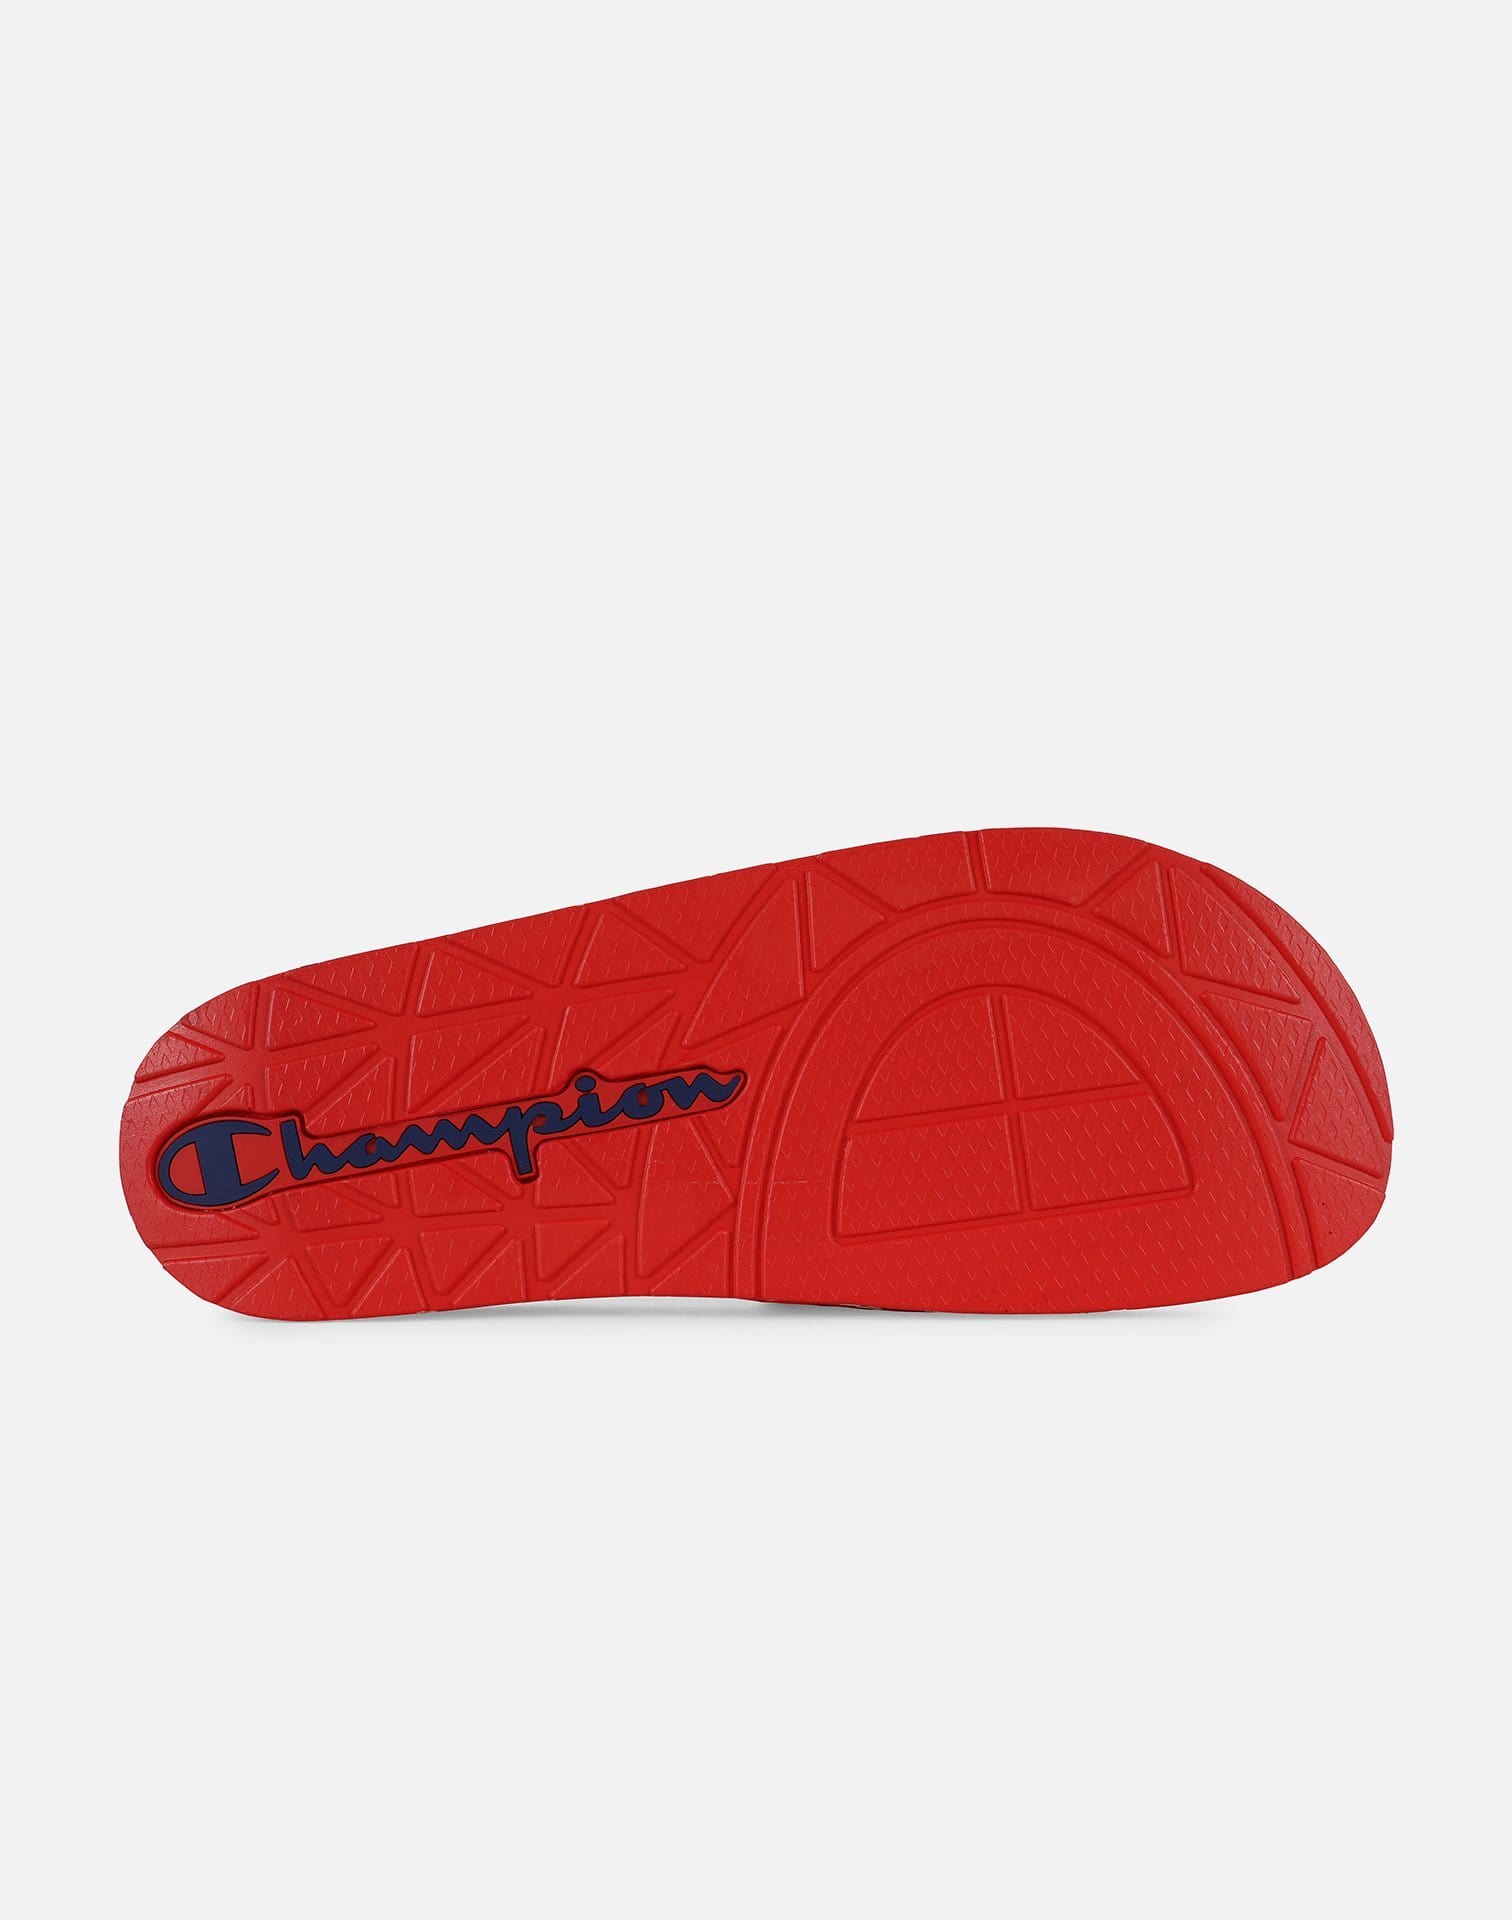 Champion IPO REPEAT SLIDES – DTLR